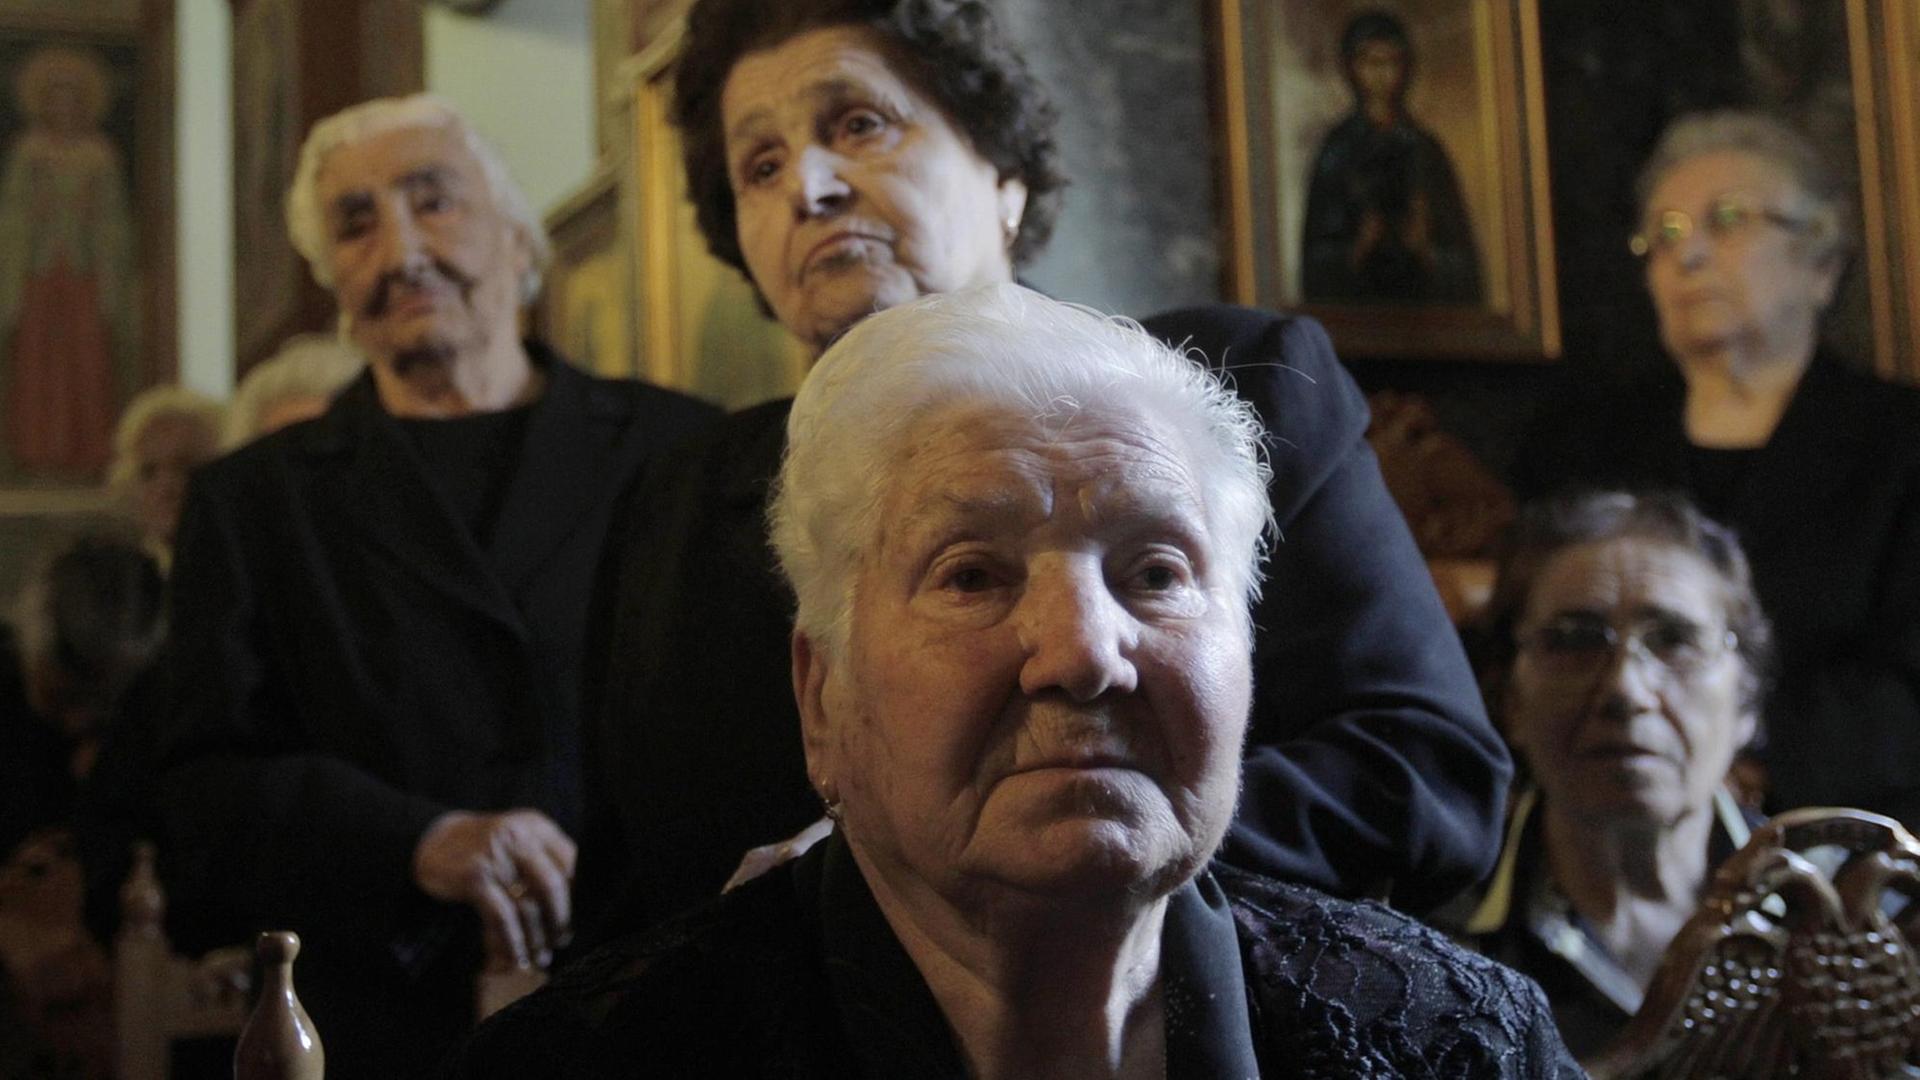 epa04800298 (05/18) Women, survivors of the Distomo massacre, attend a memorial service for the victims of the Distomo massacre during World War II, in Distomo, Greece, 10 June 2015. In Distomo, Nazi troops slaughtered 218 men, women and children in reprisal for acts of resistance on 10 June 1944. During WWII, Greece lost 10 percent of its population, almost one million people, of which 400,000 starved to death, according to statistics. Greece has never waived its claim for war reparations from Germany, while survivors of Nazi atrocities in Greek towns and villages are currently in court battles to claim compensation. EPA/ORESTIS PANAGIOTOU PLEASE REFER TO THIS ADVISORY NOTICE (epa04800291) FOR FULL PACKAGE TEXT |